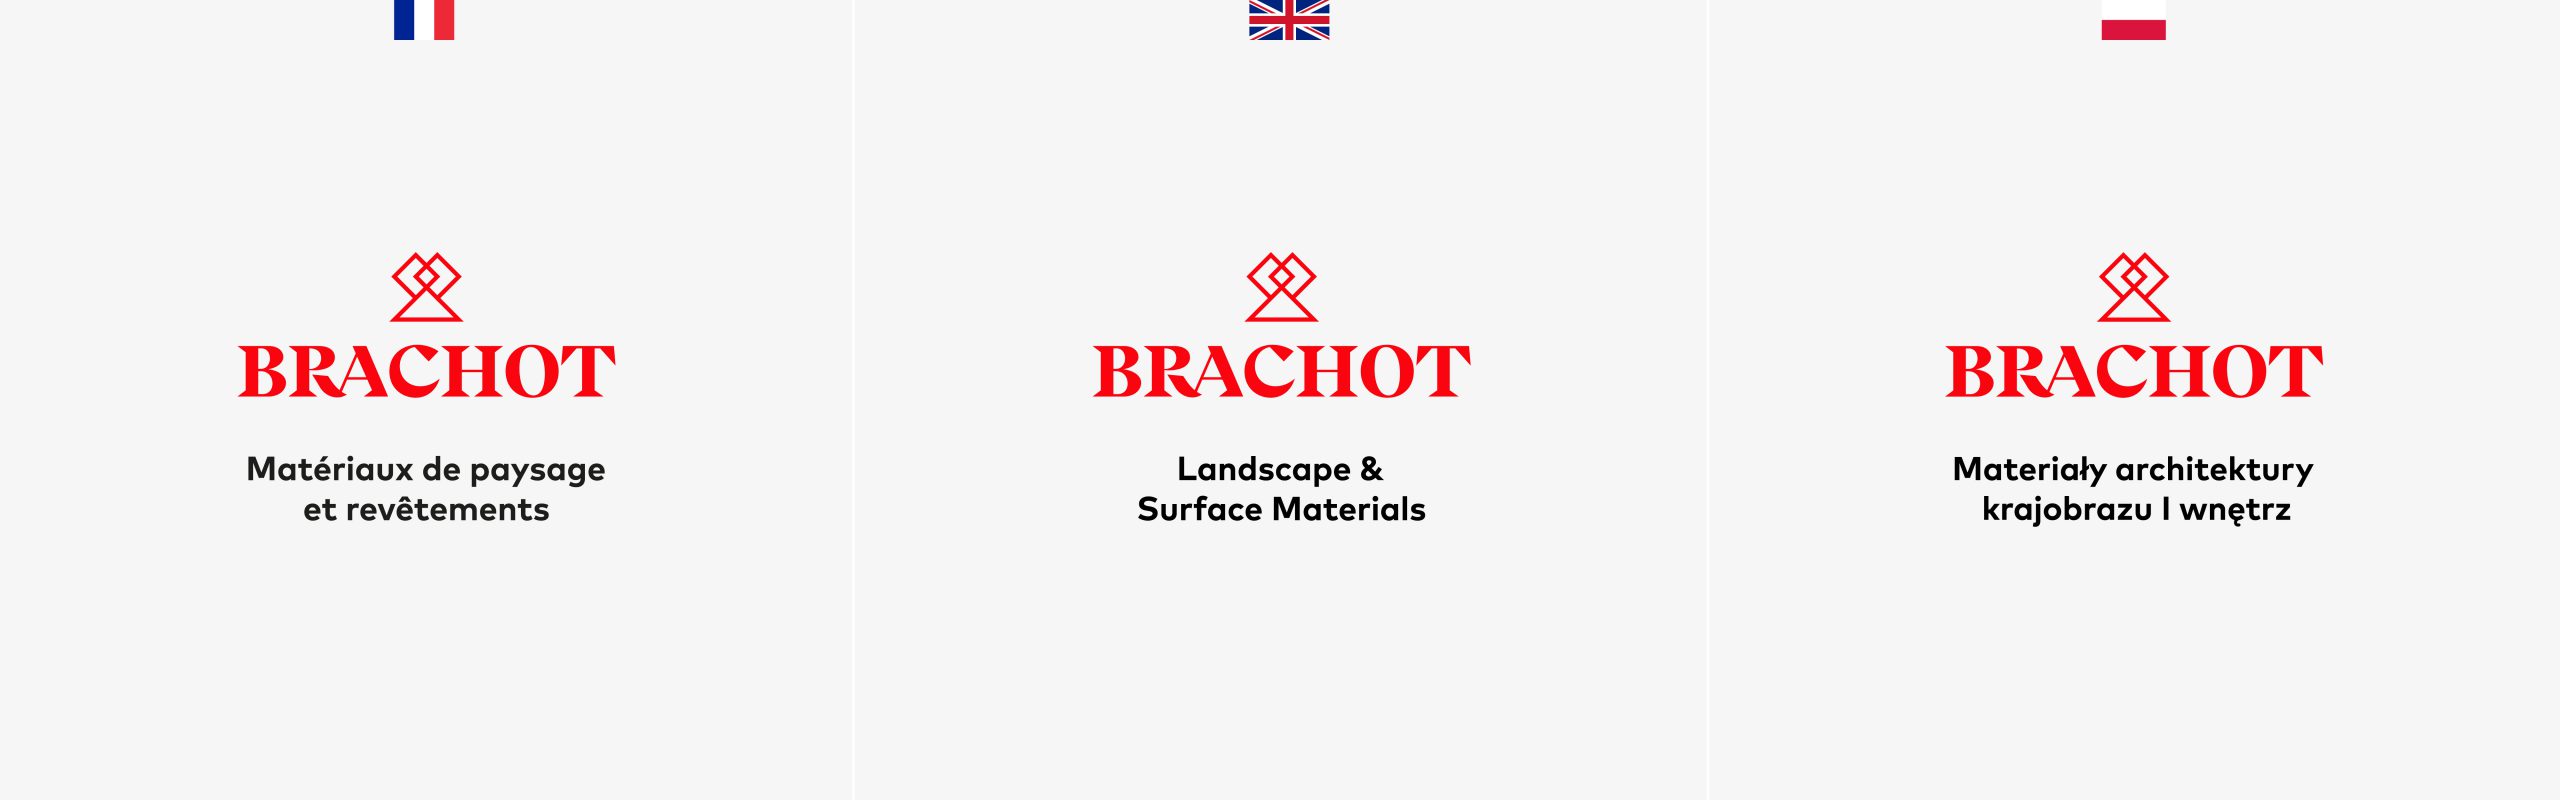 Brachot-Hermant branding - Building a solidified family containing adaptations per country